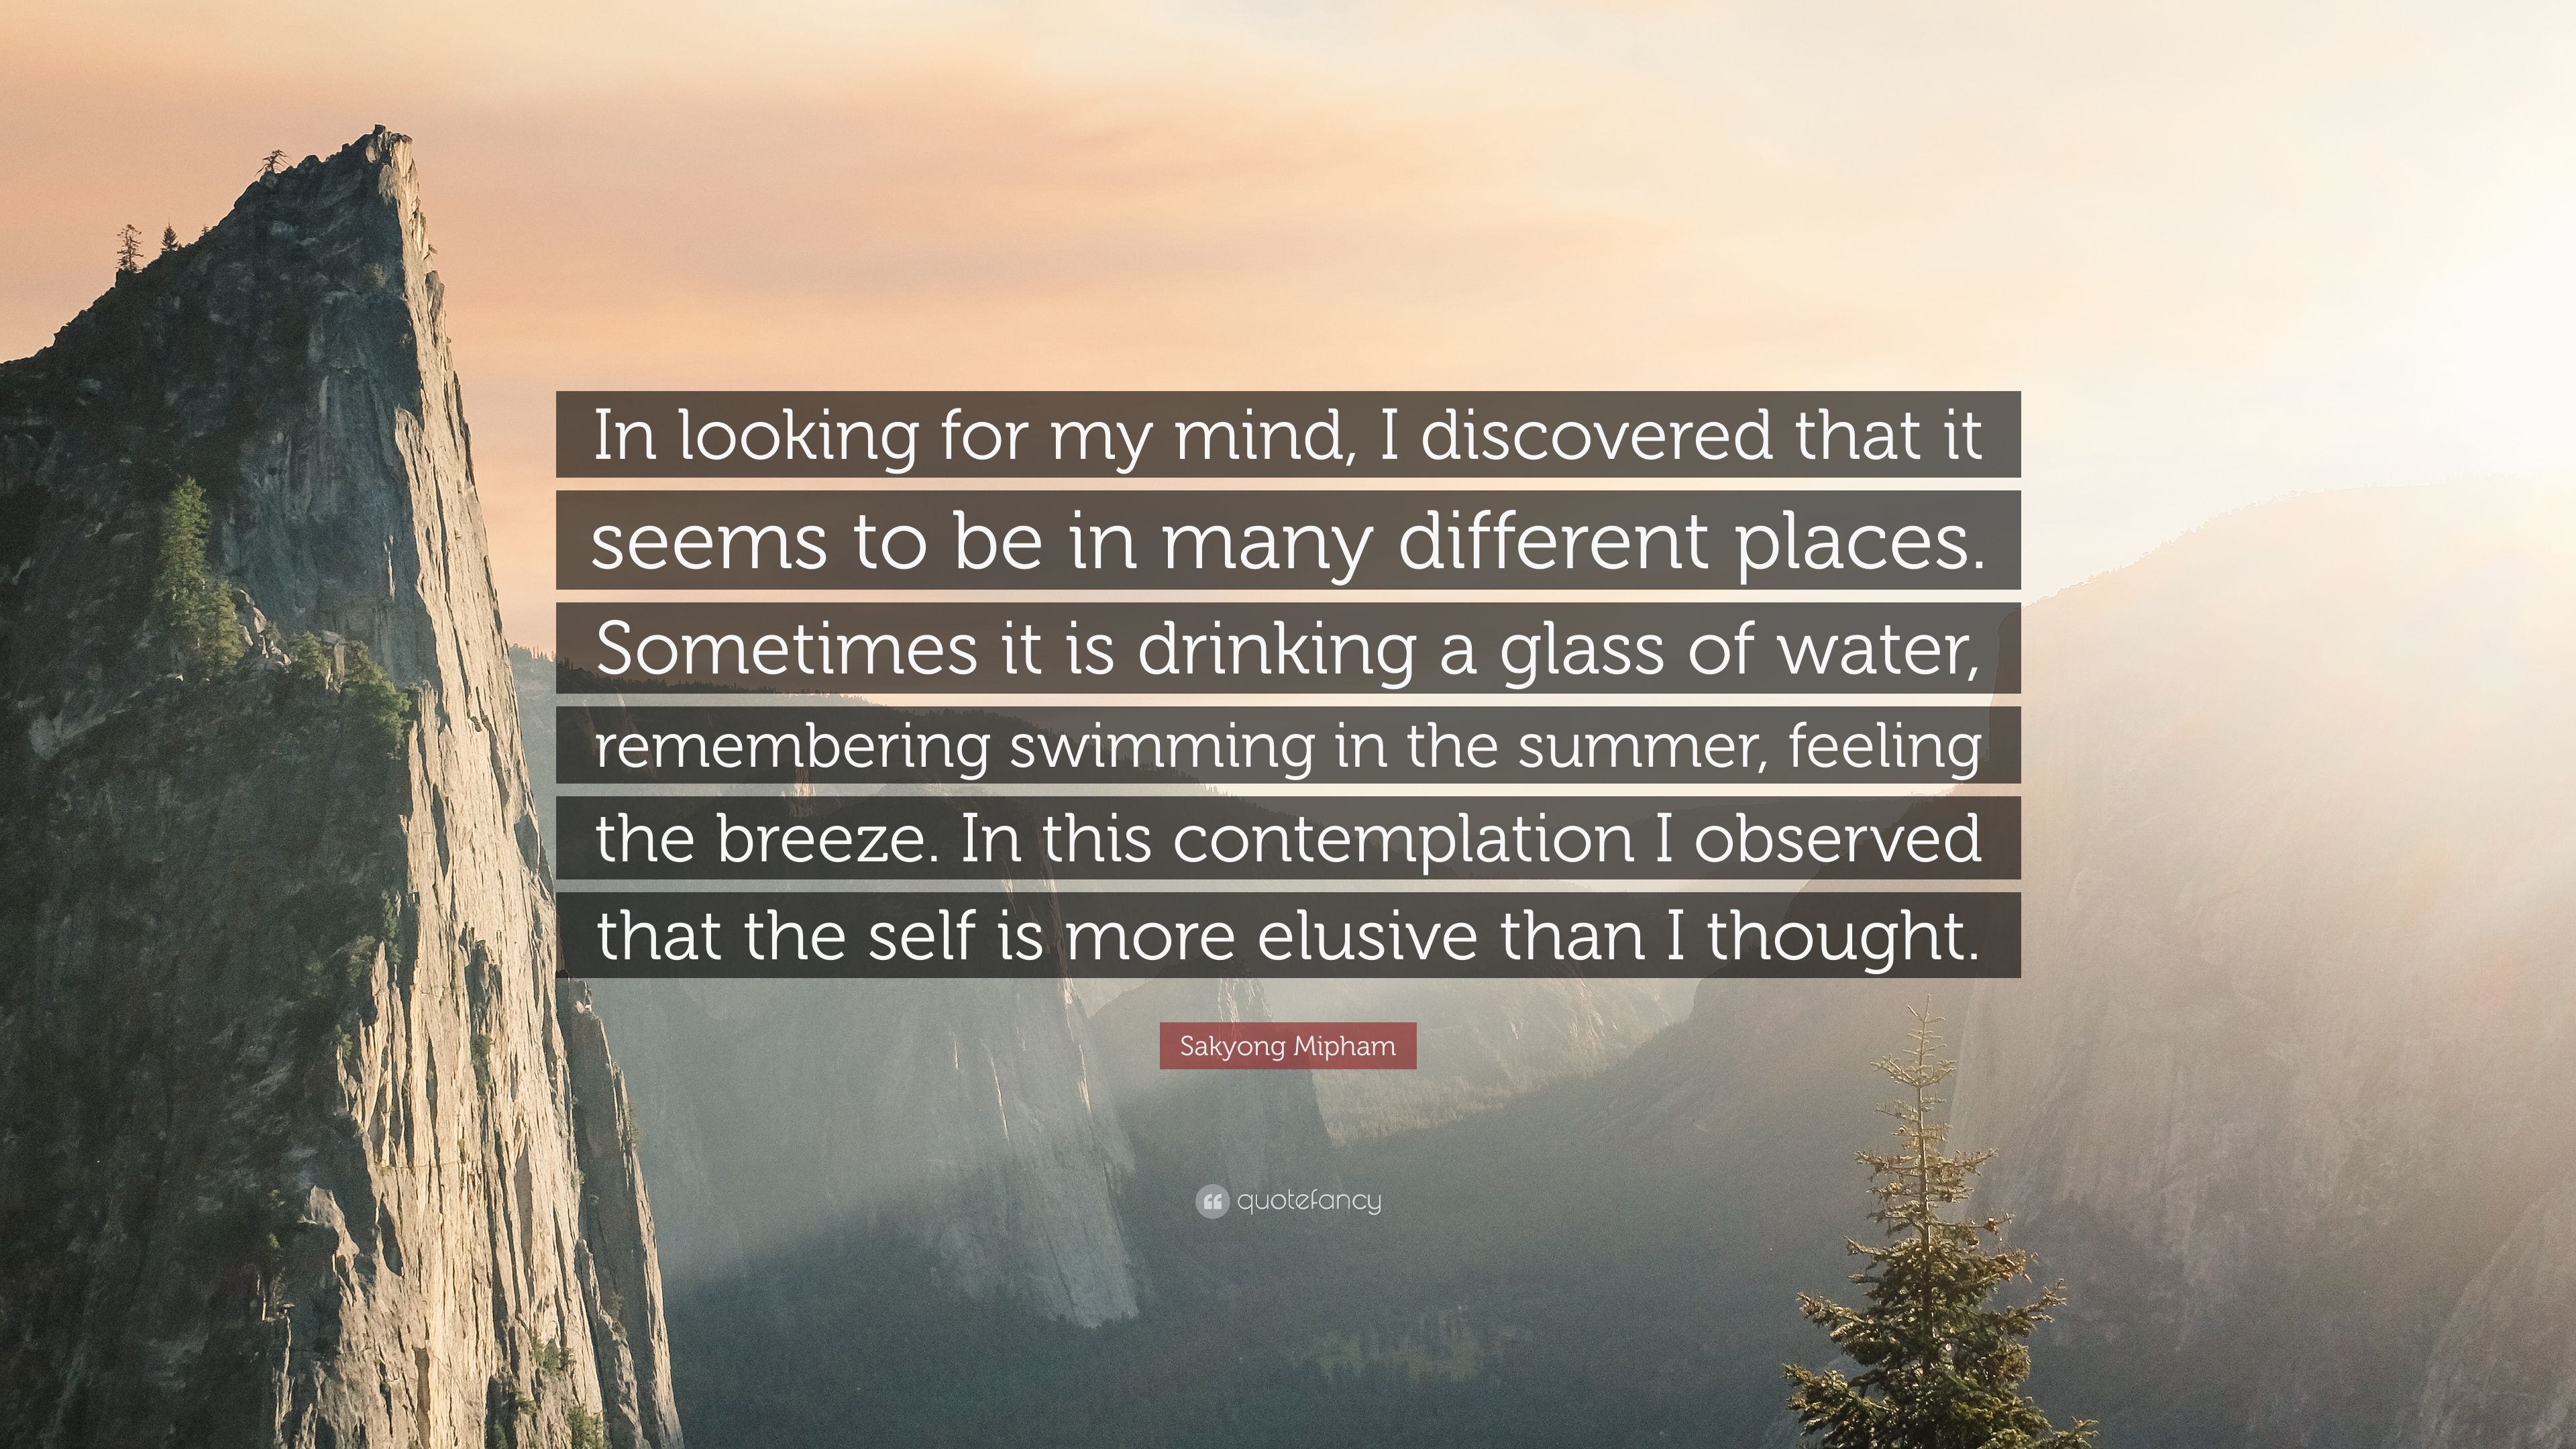 Sakyong Mipham Quote: “In looking for my mind, I discovered that